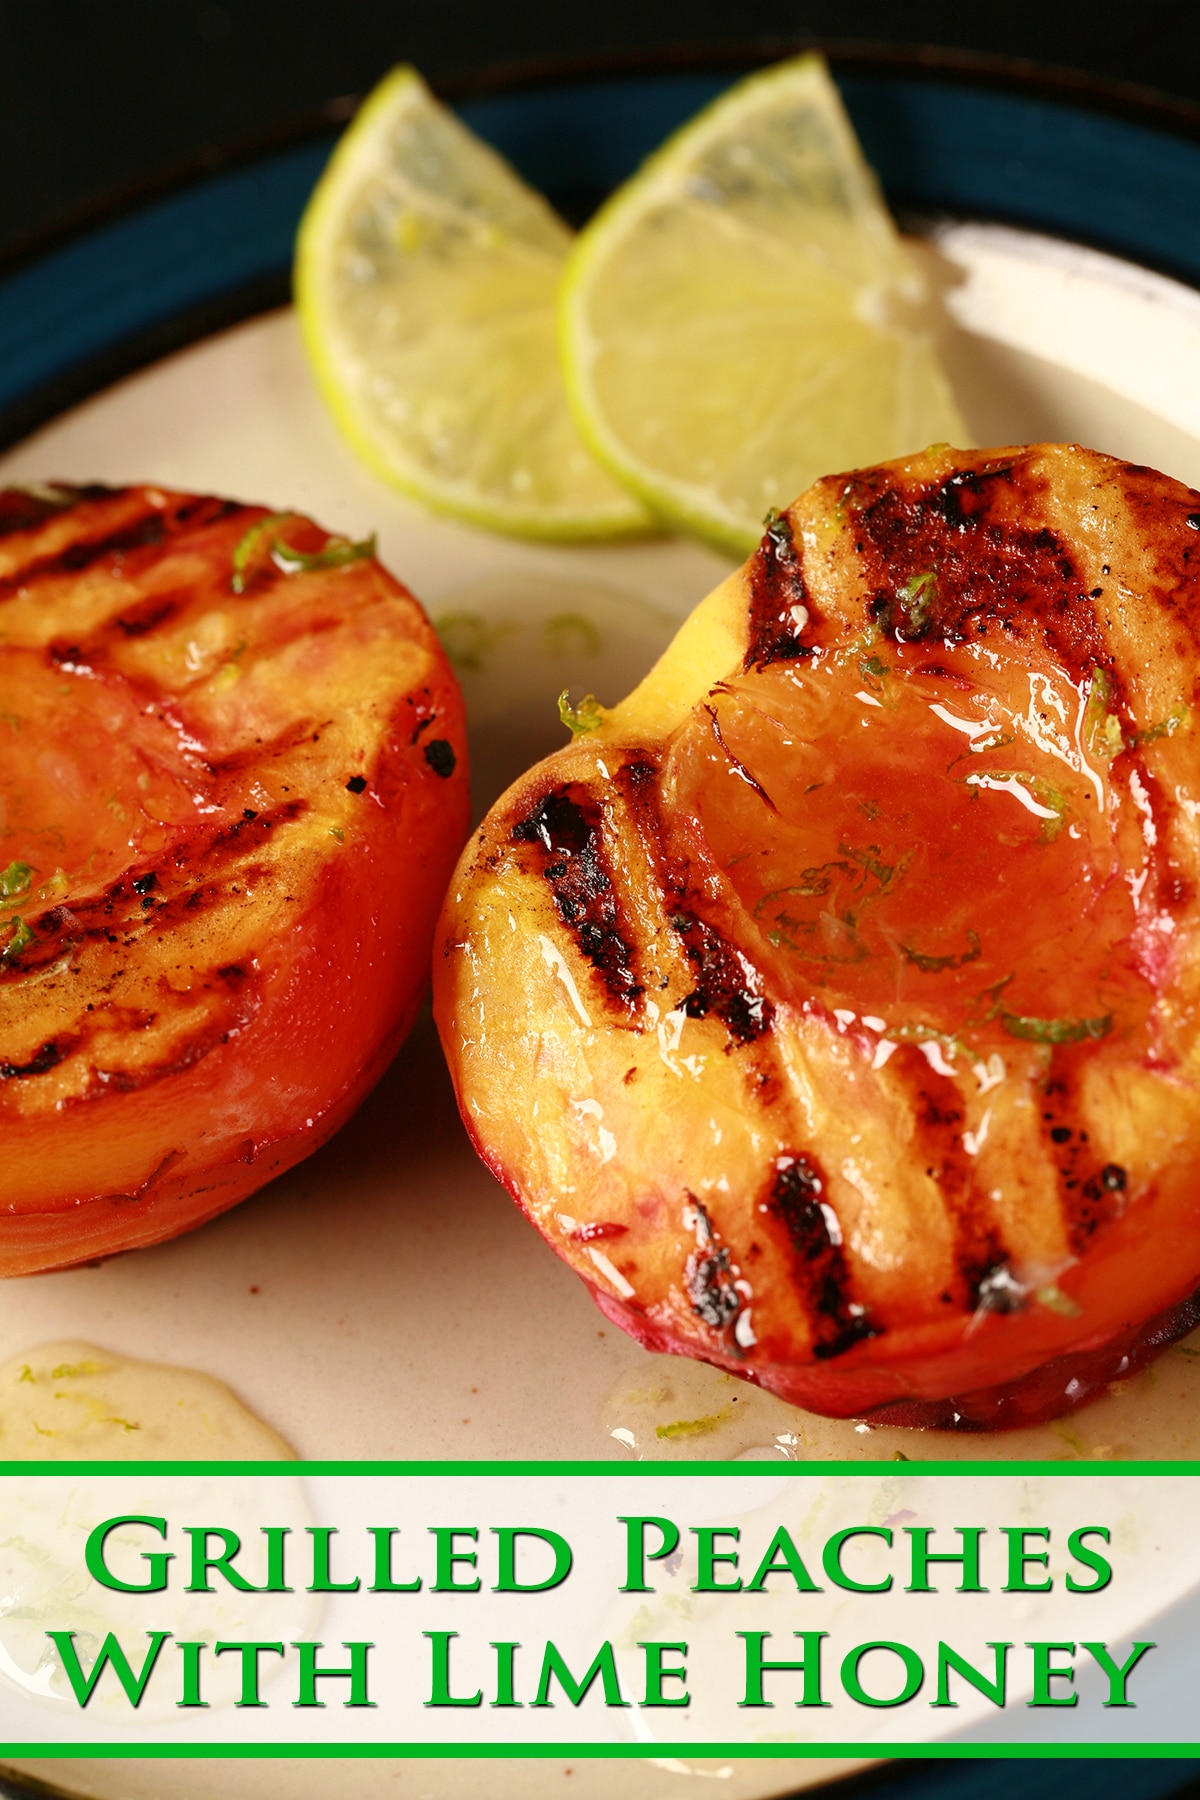 Two grilled peach halves on a plate, drizzled with lime honey.